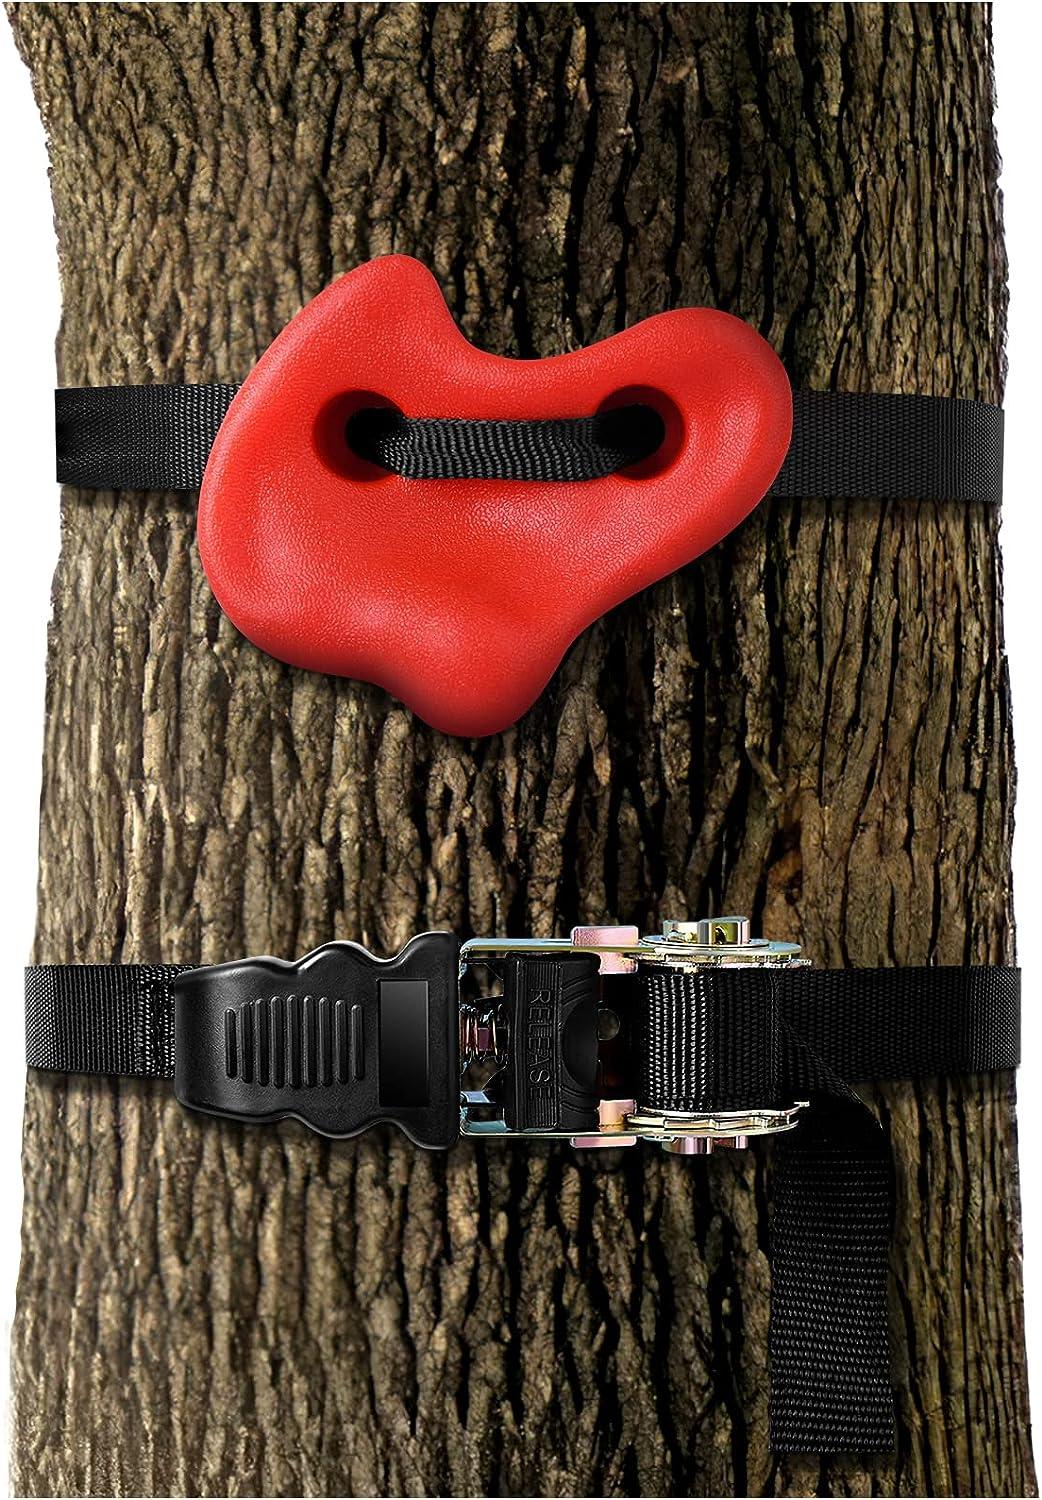 NAQIER 20 Ninja Tree Climbing Holds and 6 Sturdy Ratchet Straps for Kids  Tree Climbing Climbing Rocks for Outdoor Ninja Warrior Obstacle Course  Training